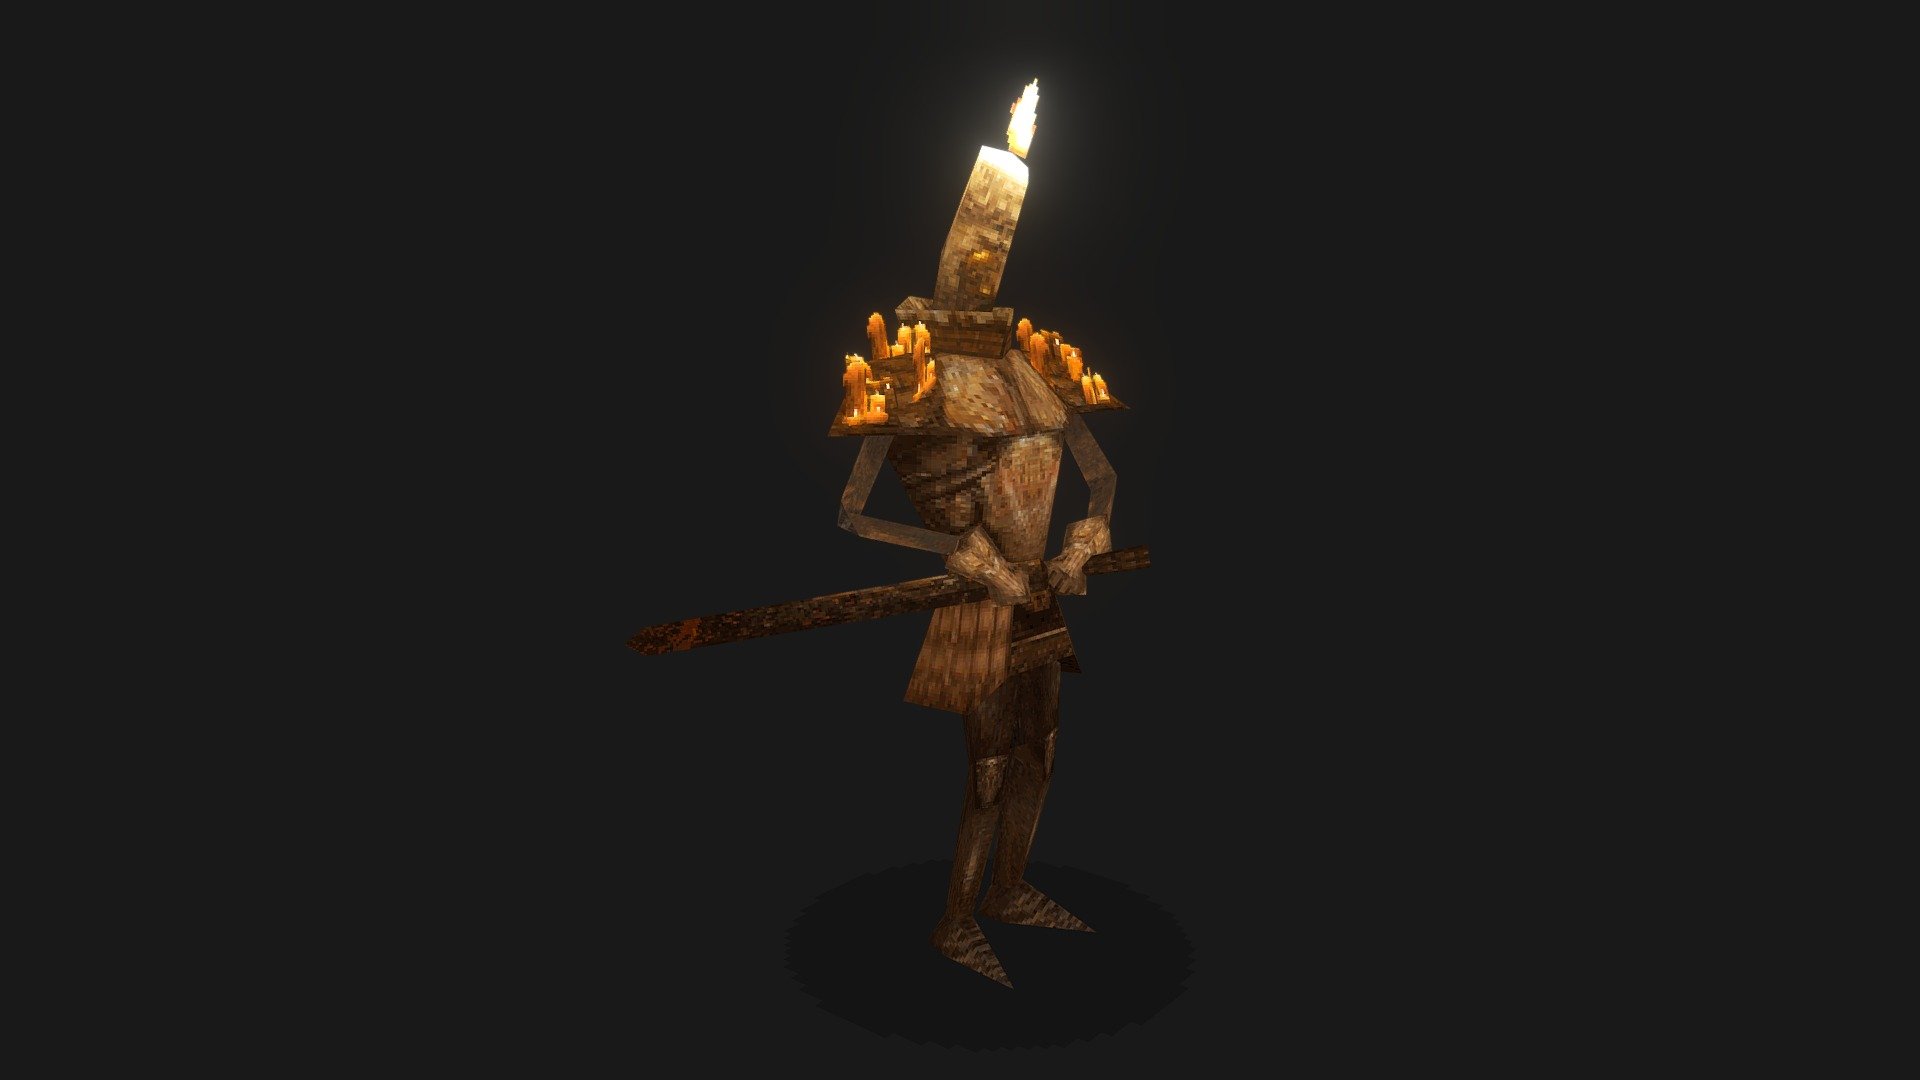 An attempt to the 256fes challenge, inspired by the concept art of Théo Guillot
https://www.artstation.com/artwork/Ndnlq - Candle Knight - 3D model by WaunMan 3d model